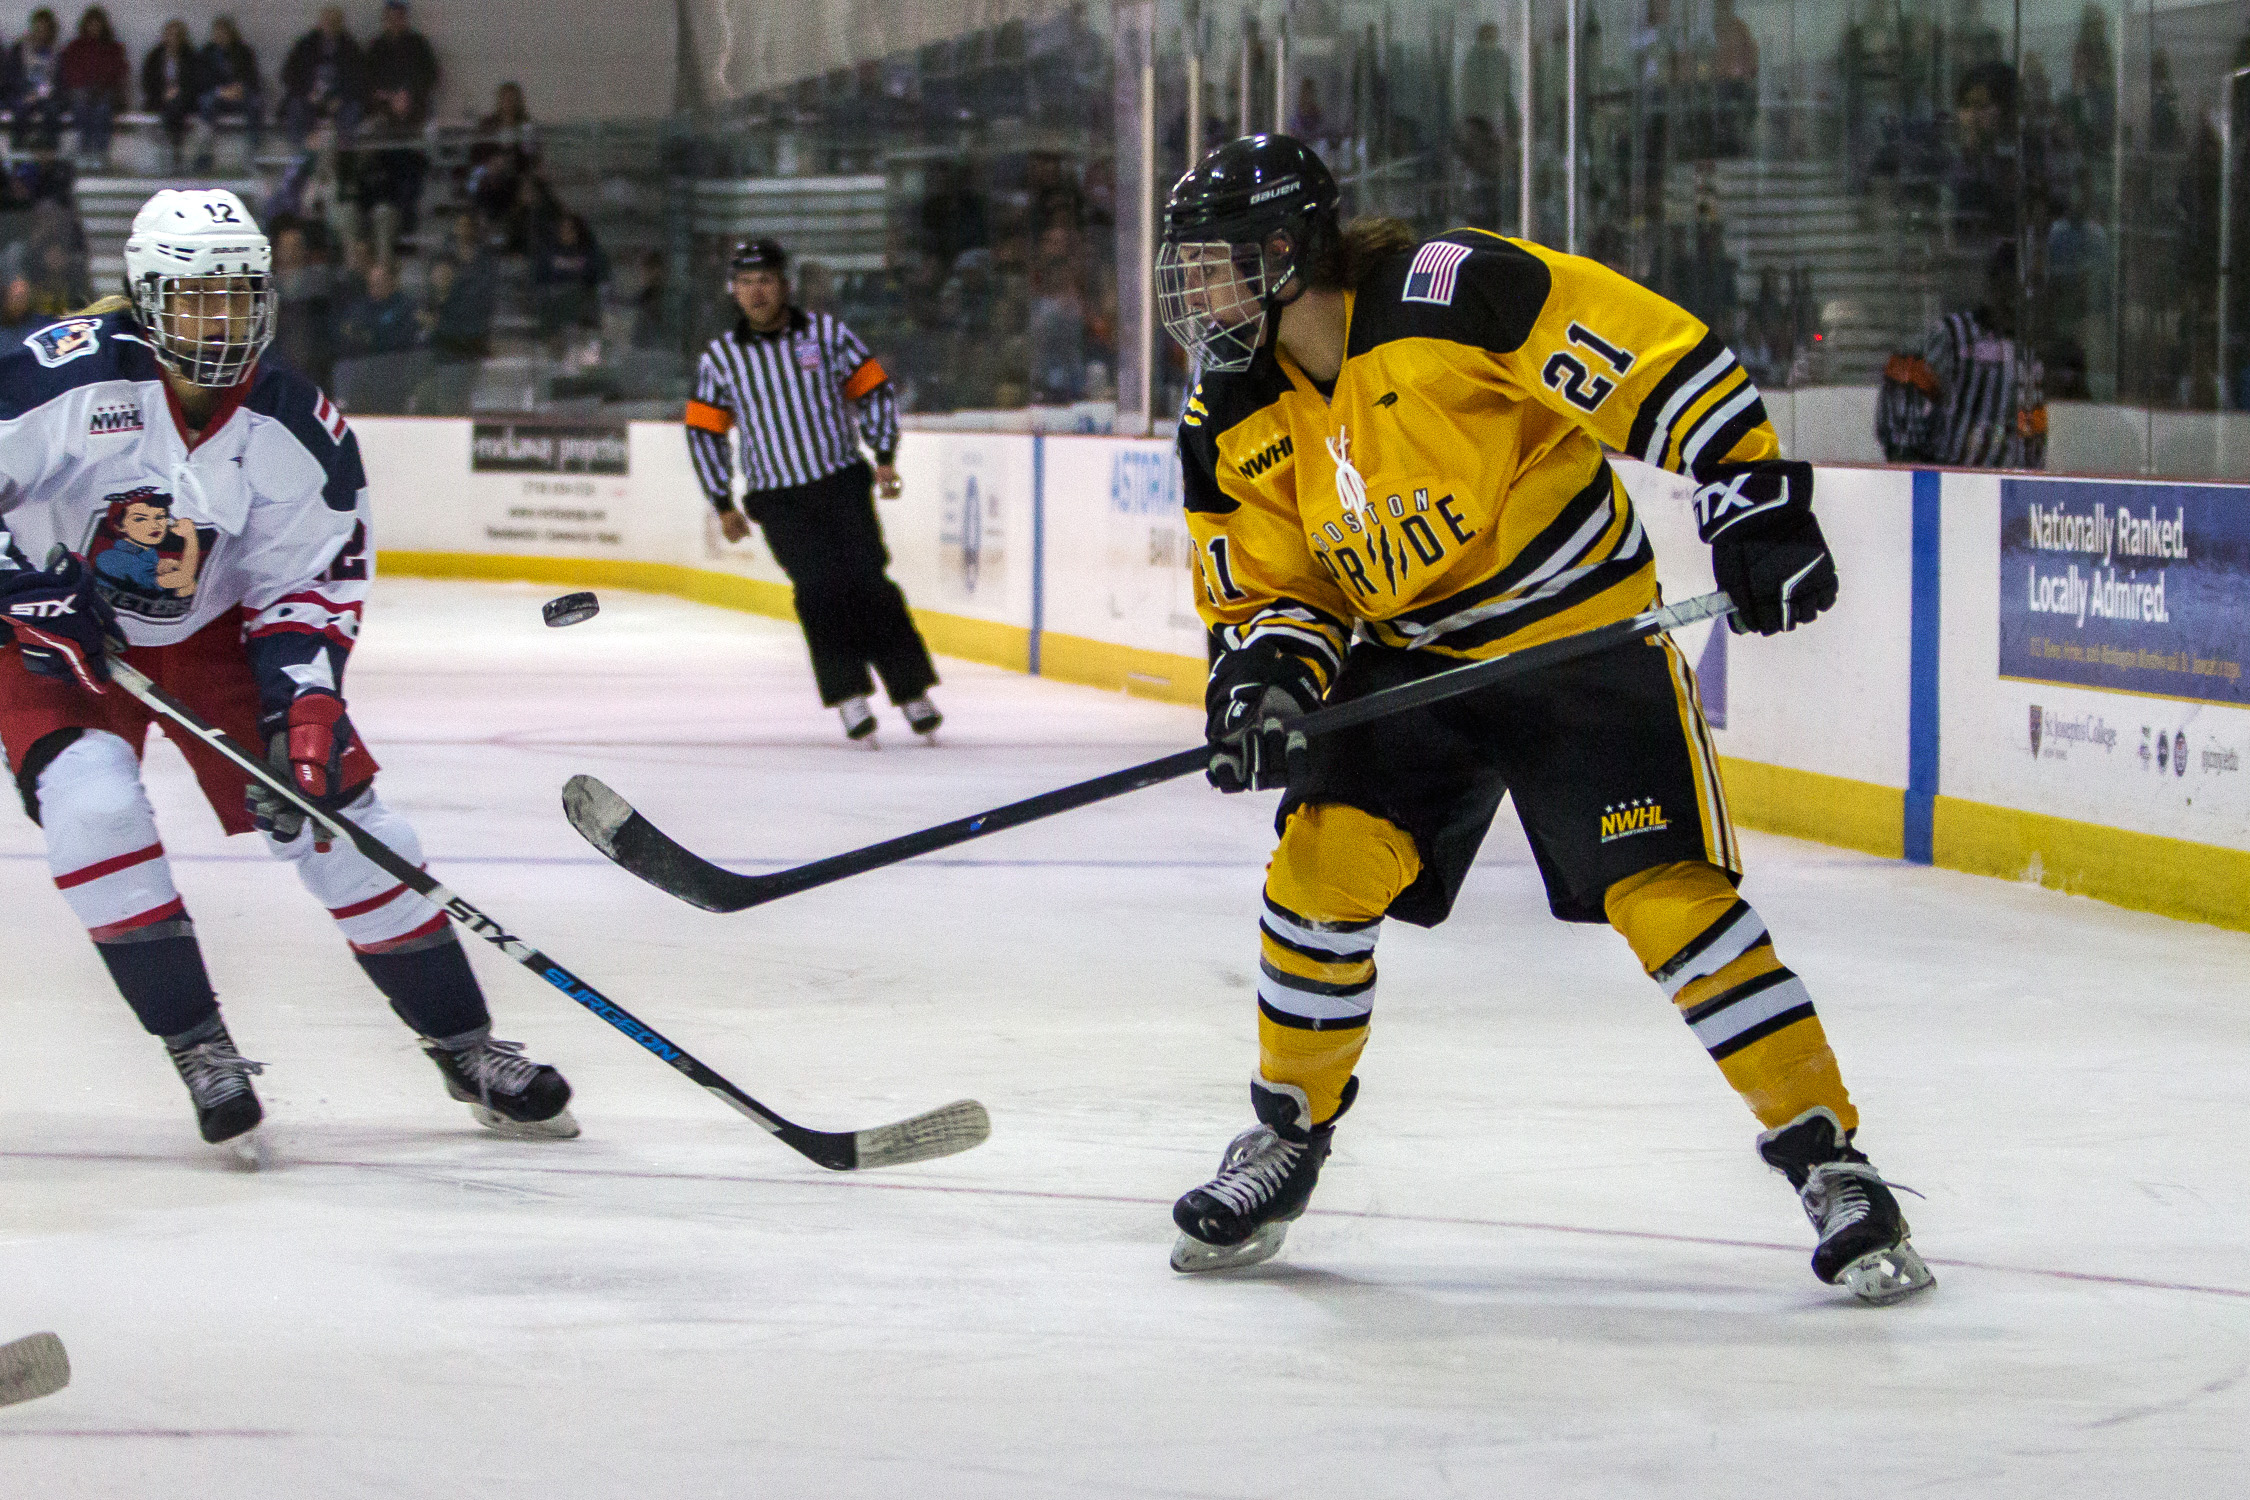 NWHL: Boston Pride Blow Out NY Riveters, 7-1